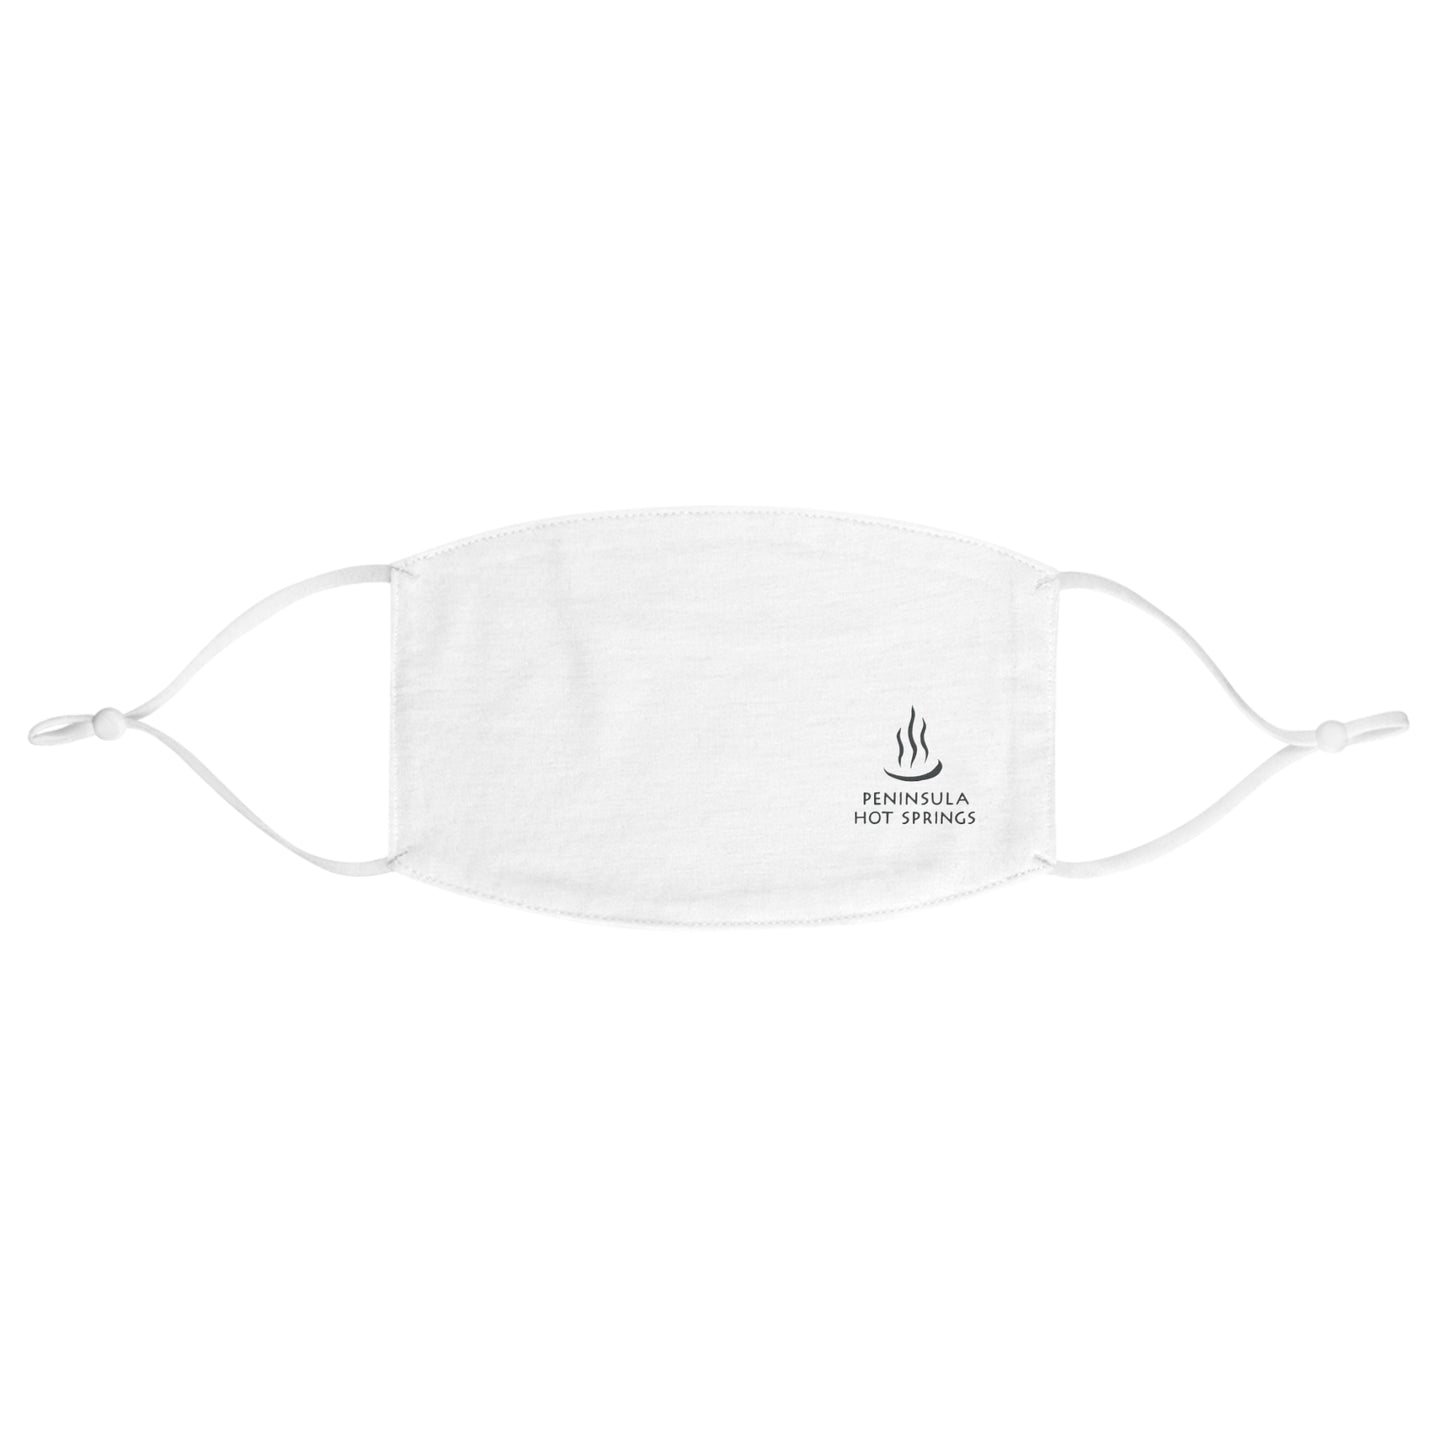 PENINSULAR HOT SPRINGS Cotton Fabric Mask with adjustable strip